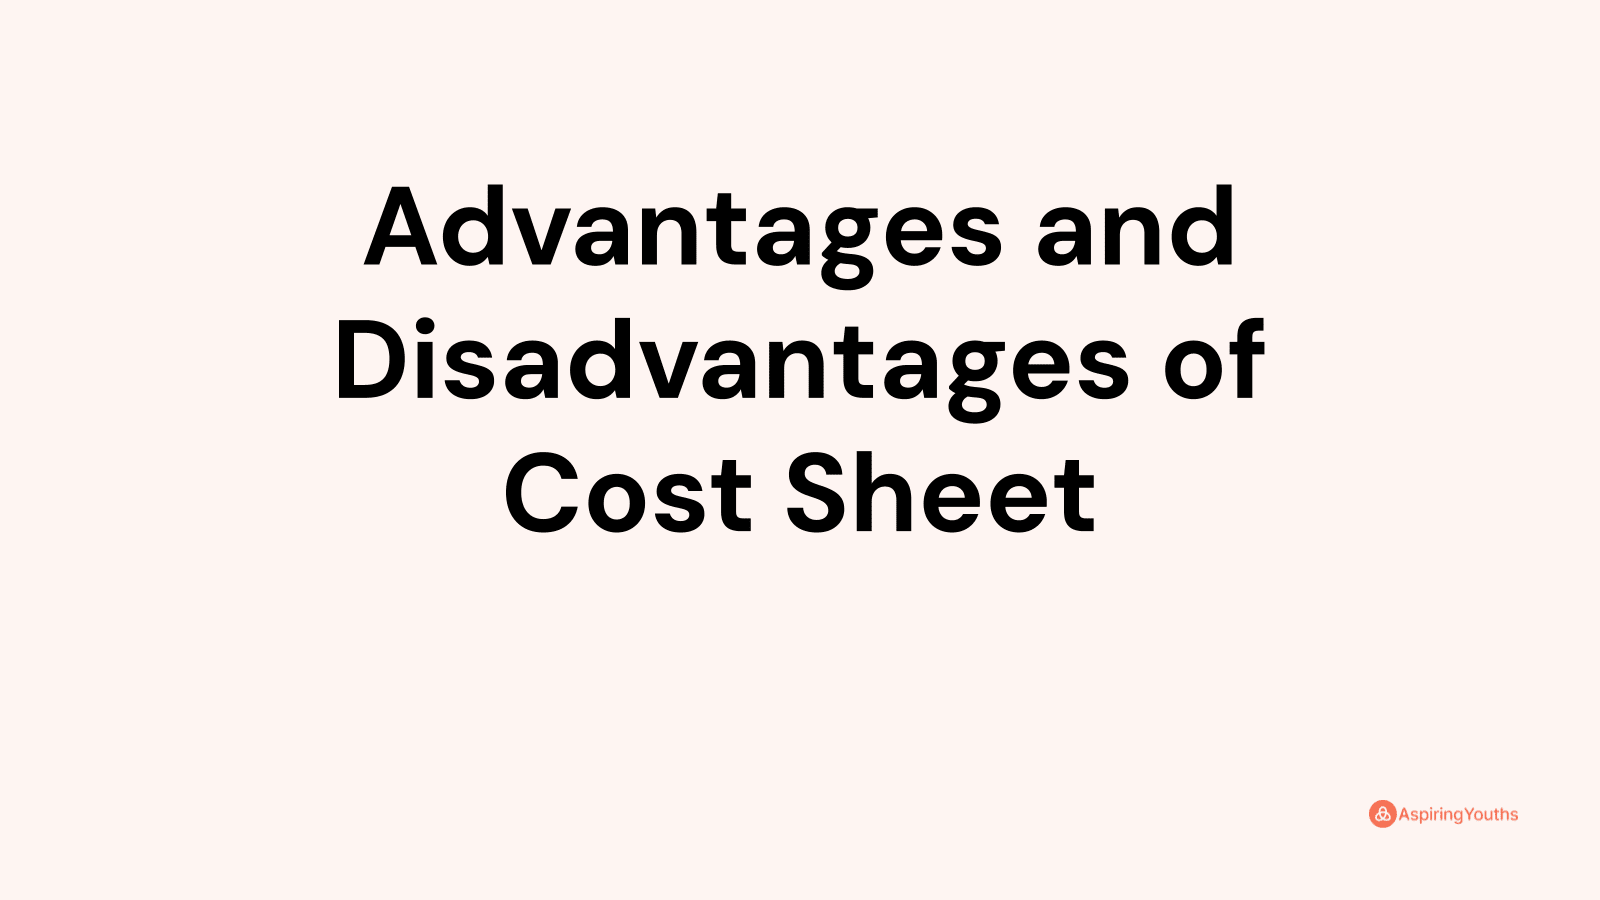 Advantages and disadvantages of Cost Sheet